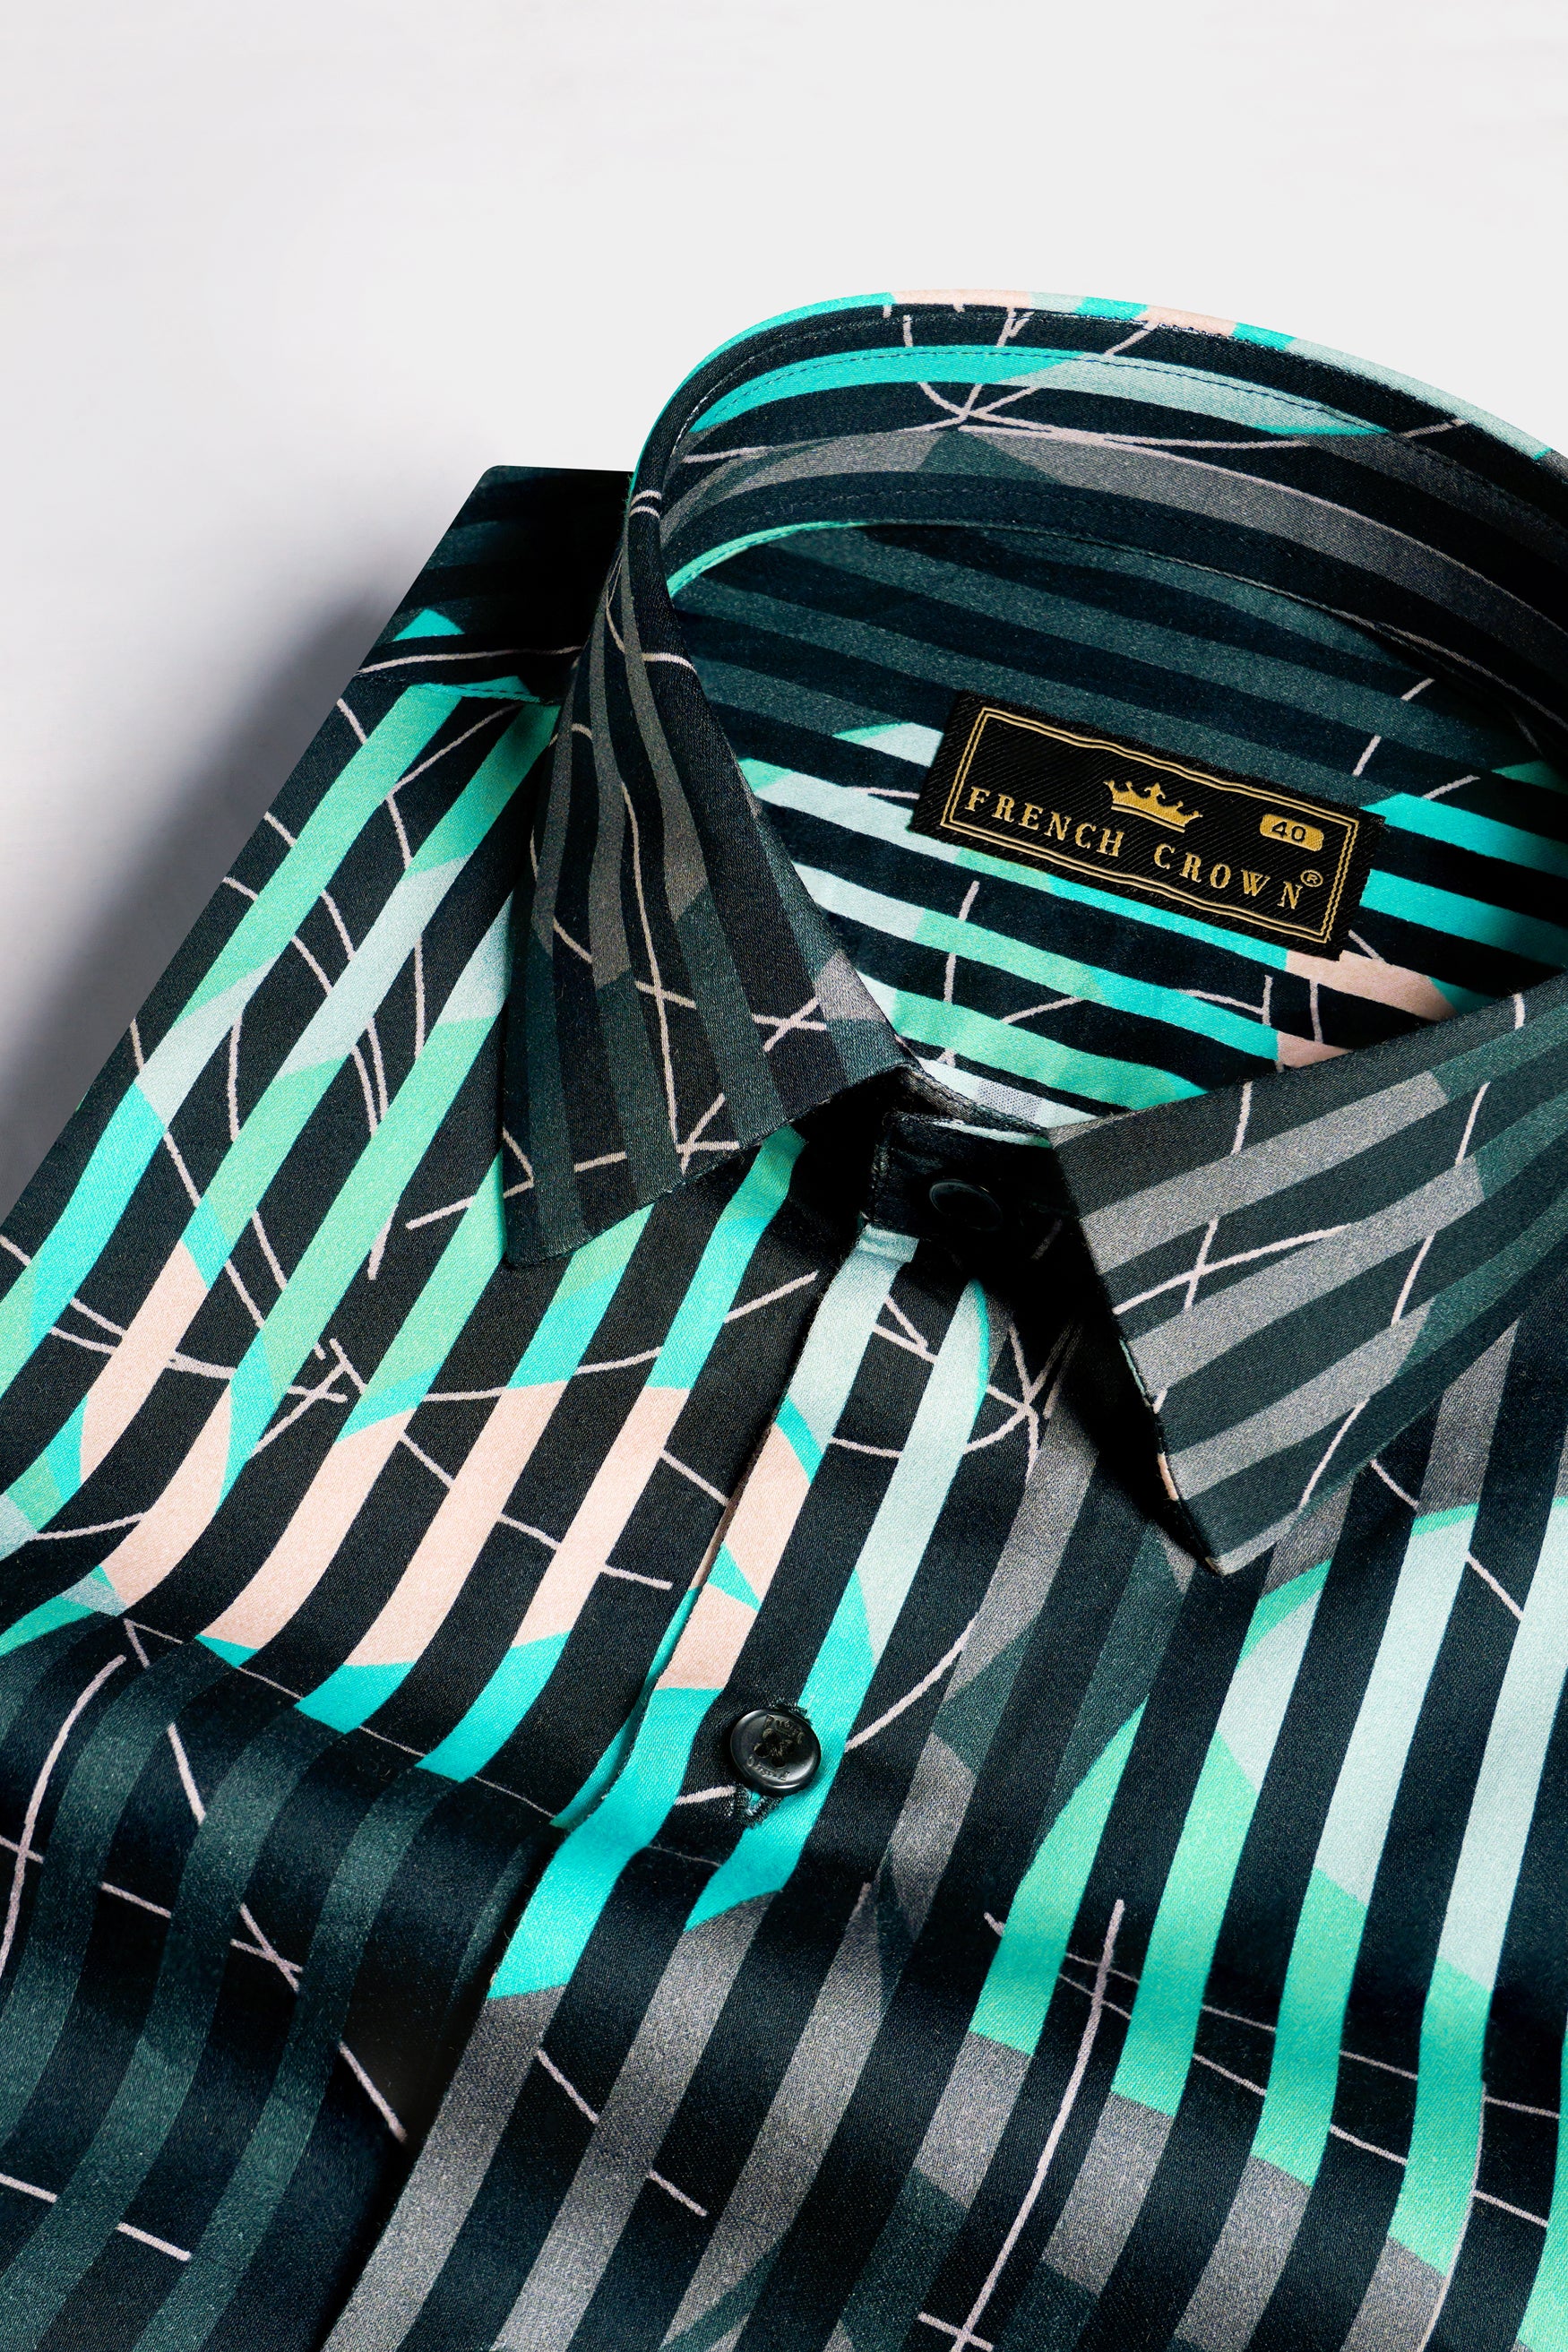 Plantation Green with Almond Beige and Mountain Green Linear Abstract Printed Subtle Sheen Super Soft Premium Cotton Designer Shirt 12043-BLK-38, 12043-BLK-H-38, 12043-BLK-39, 12043-BLK-H-39, 12043-BLK-40, 12043-BLK-H-40, 12043-BLK-42, 12043-BLK-H-42, 12043-BLK-44, 12043-BLK-H-44, 12043-BLK-46, 12043-BLK-H-46, 12043-BLK-48, 12043-BLK-H-48, 12043-BLK-50, 12043-BLK-H-50, 12043-BLK-52, 12043-BLK-H-52